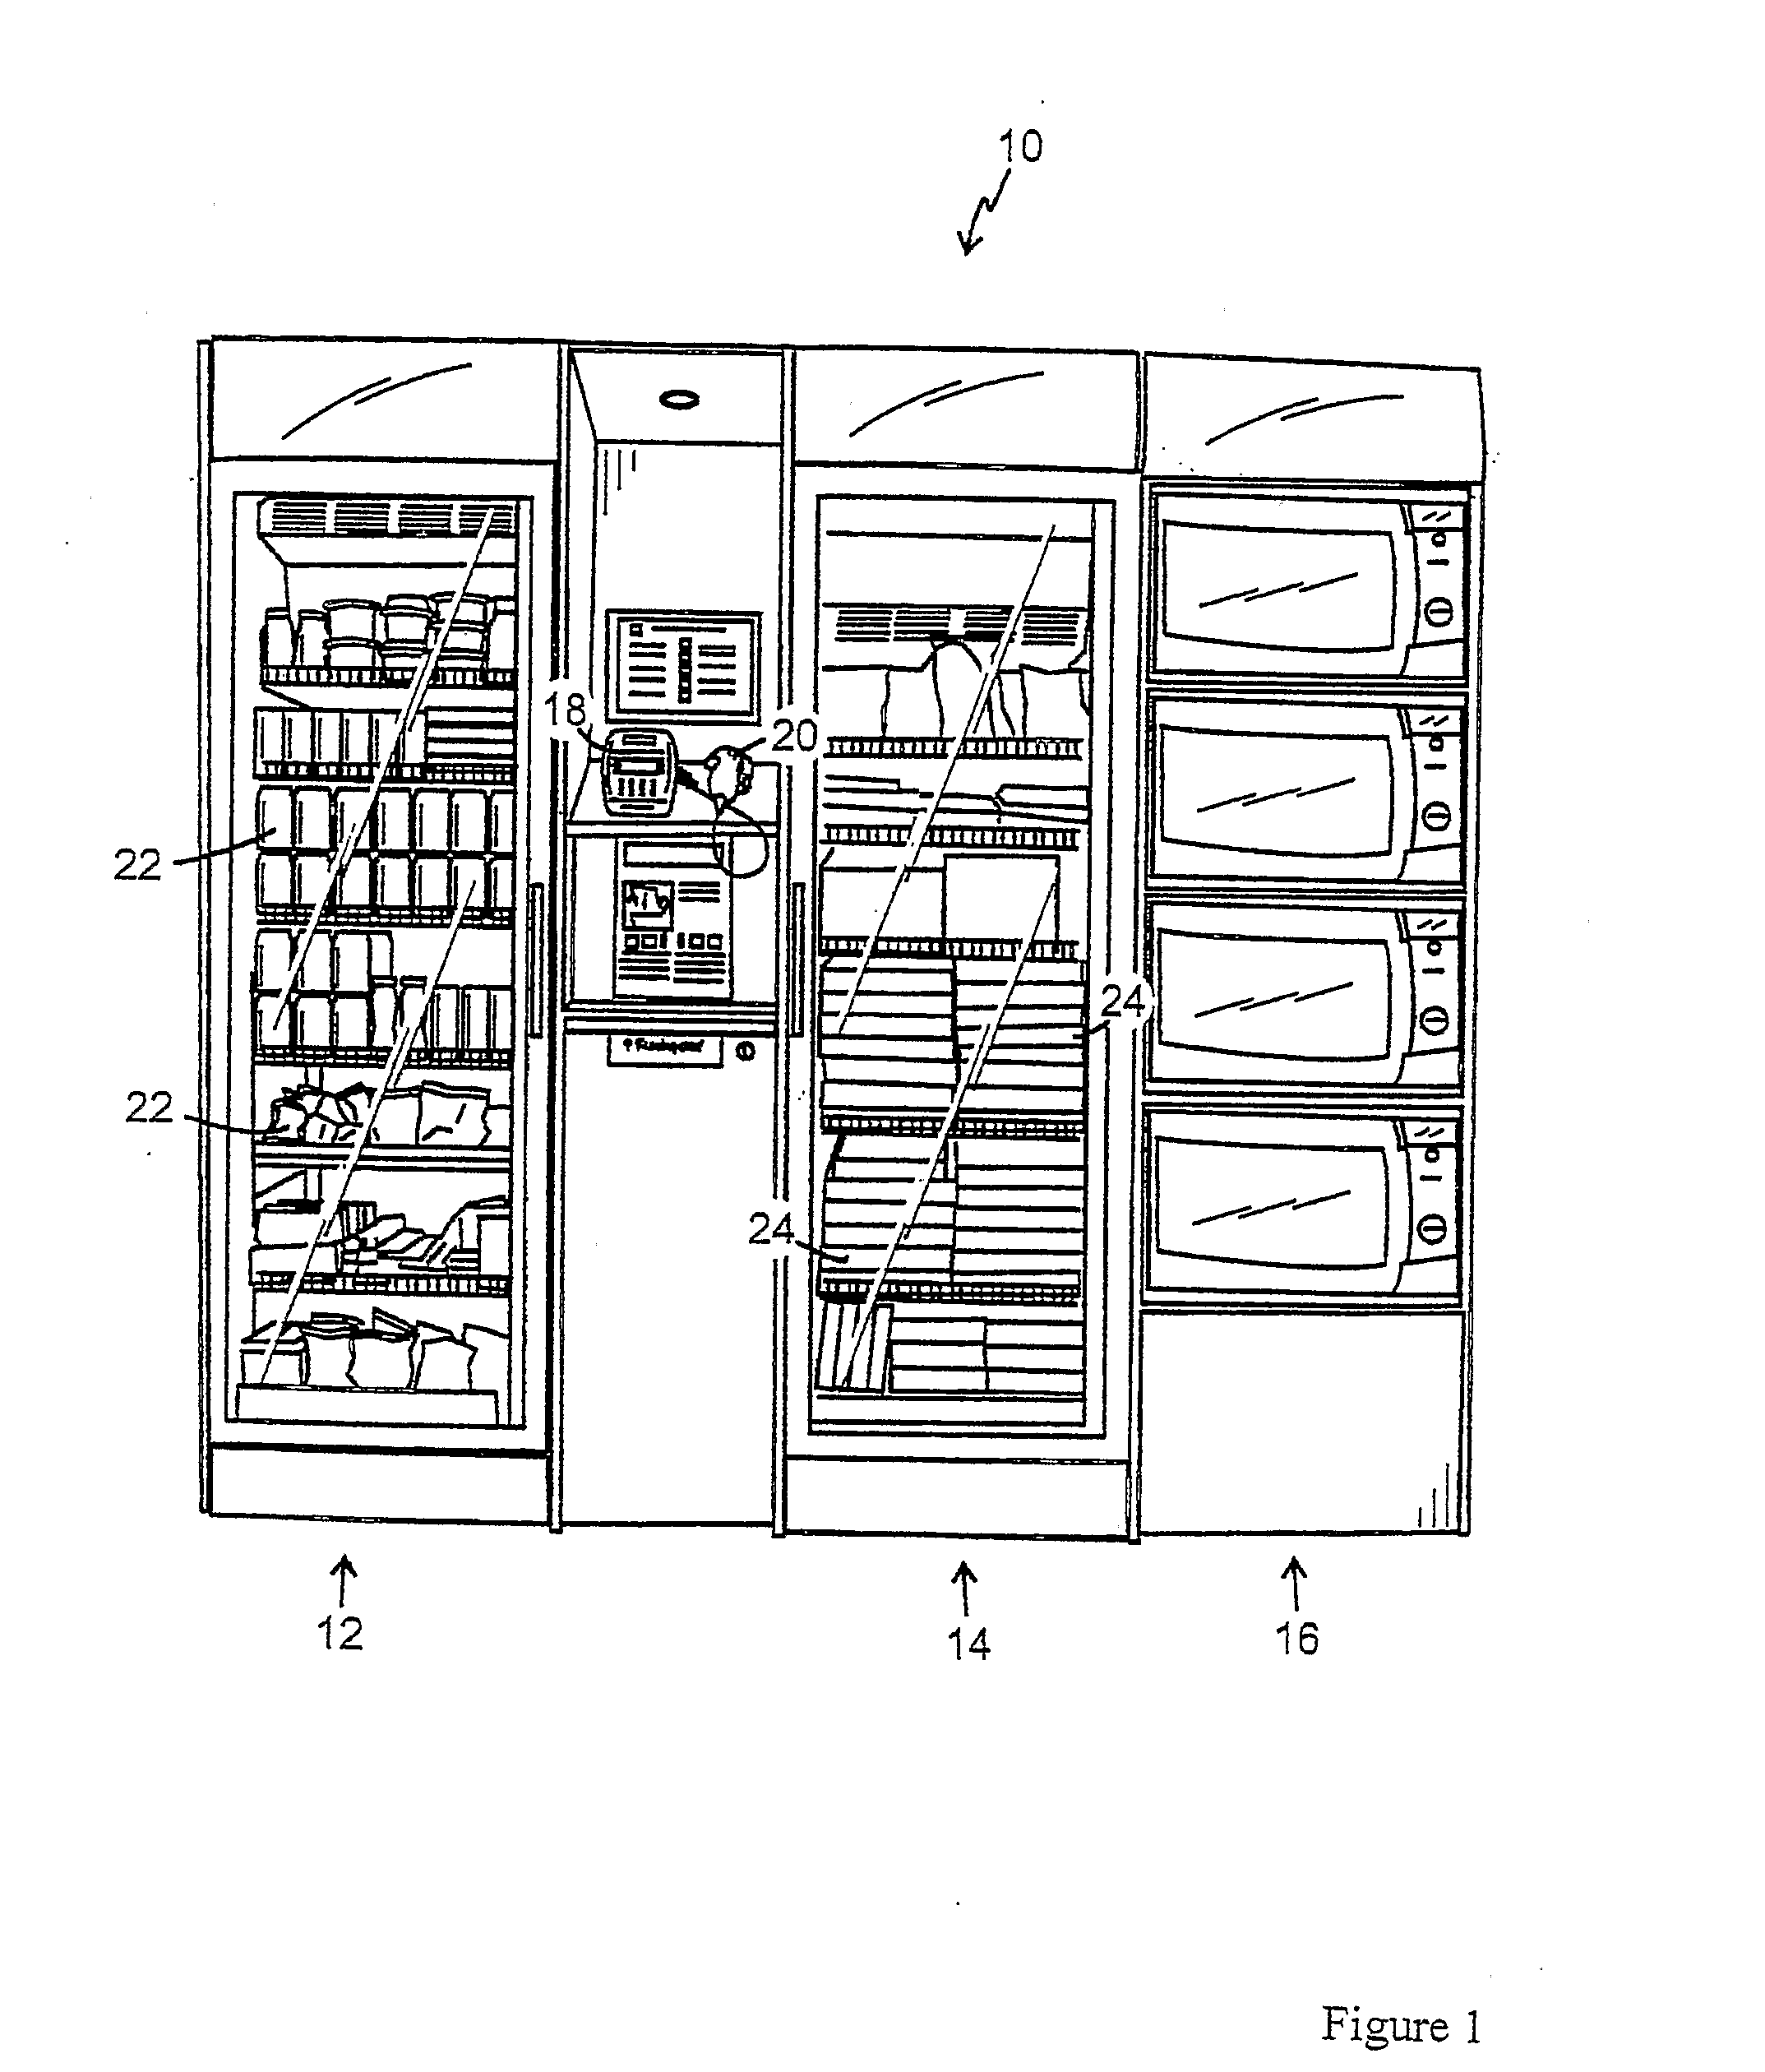 Storage-Cabinet and Method for Selling Frozen and/or Refrigerated Goods From Such a Locked Storage-Cabinet